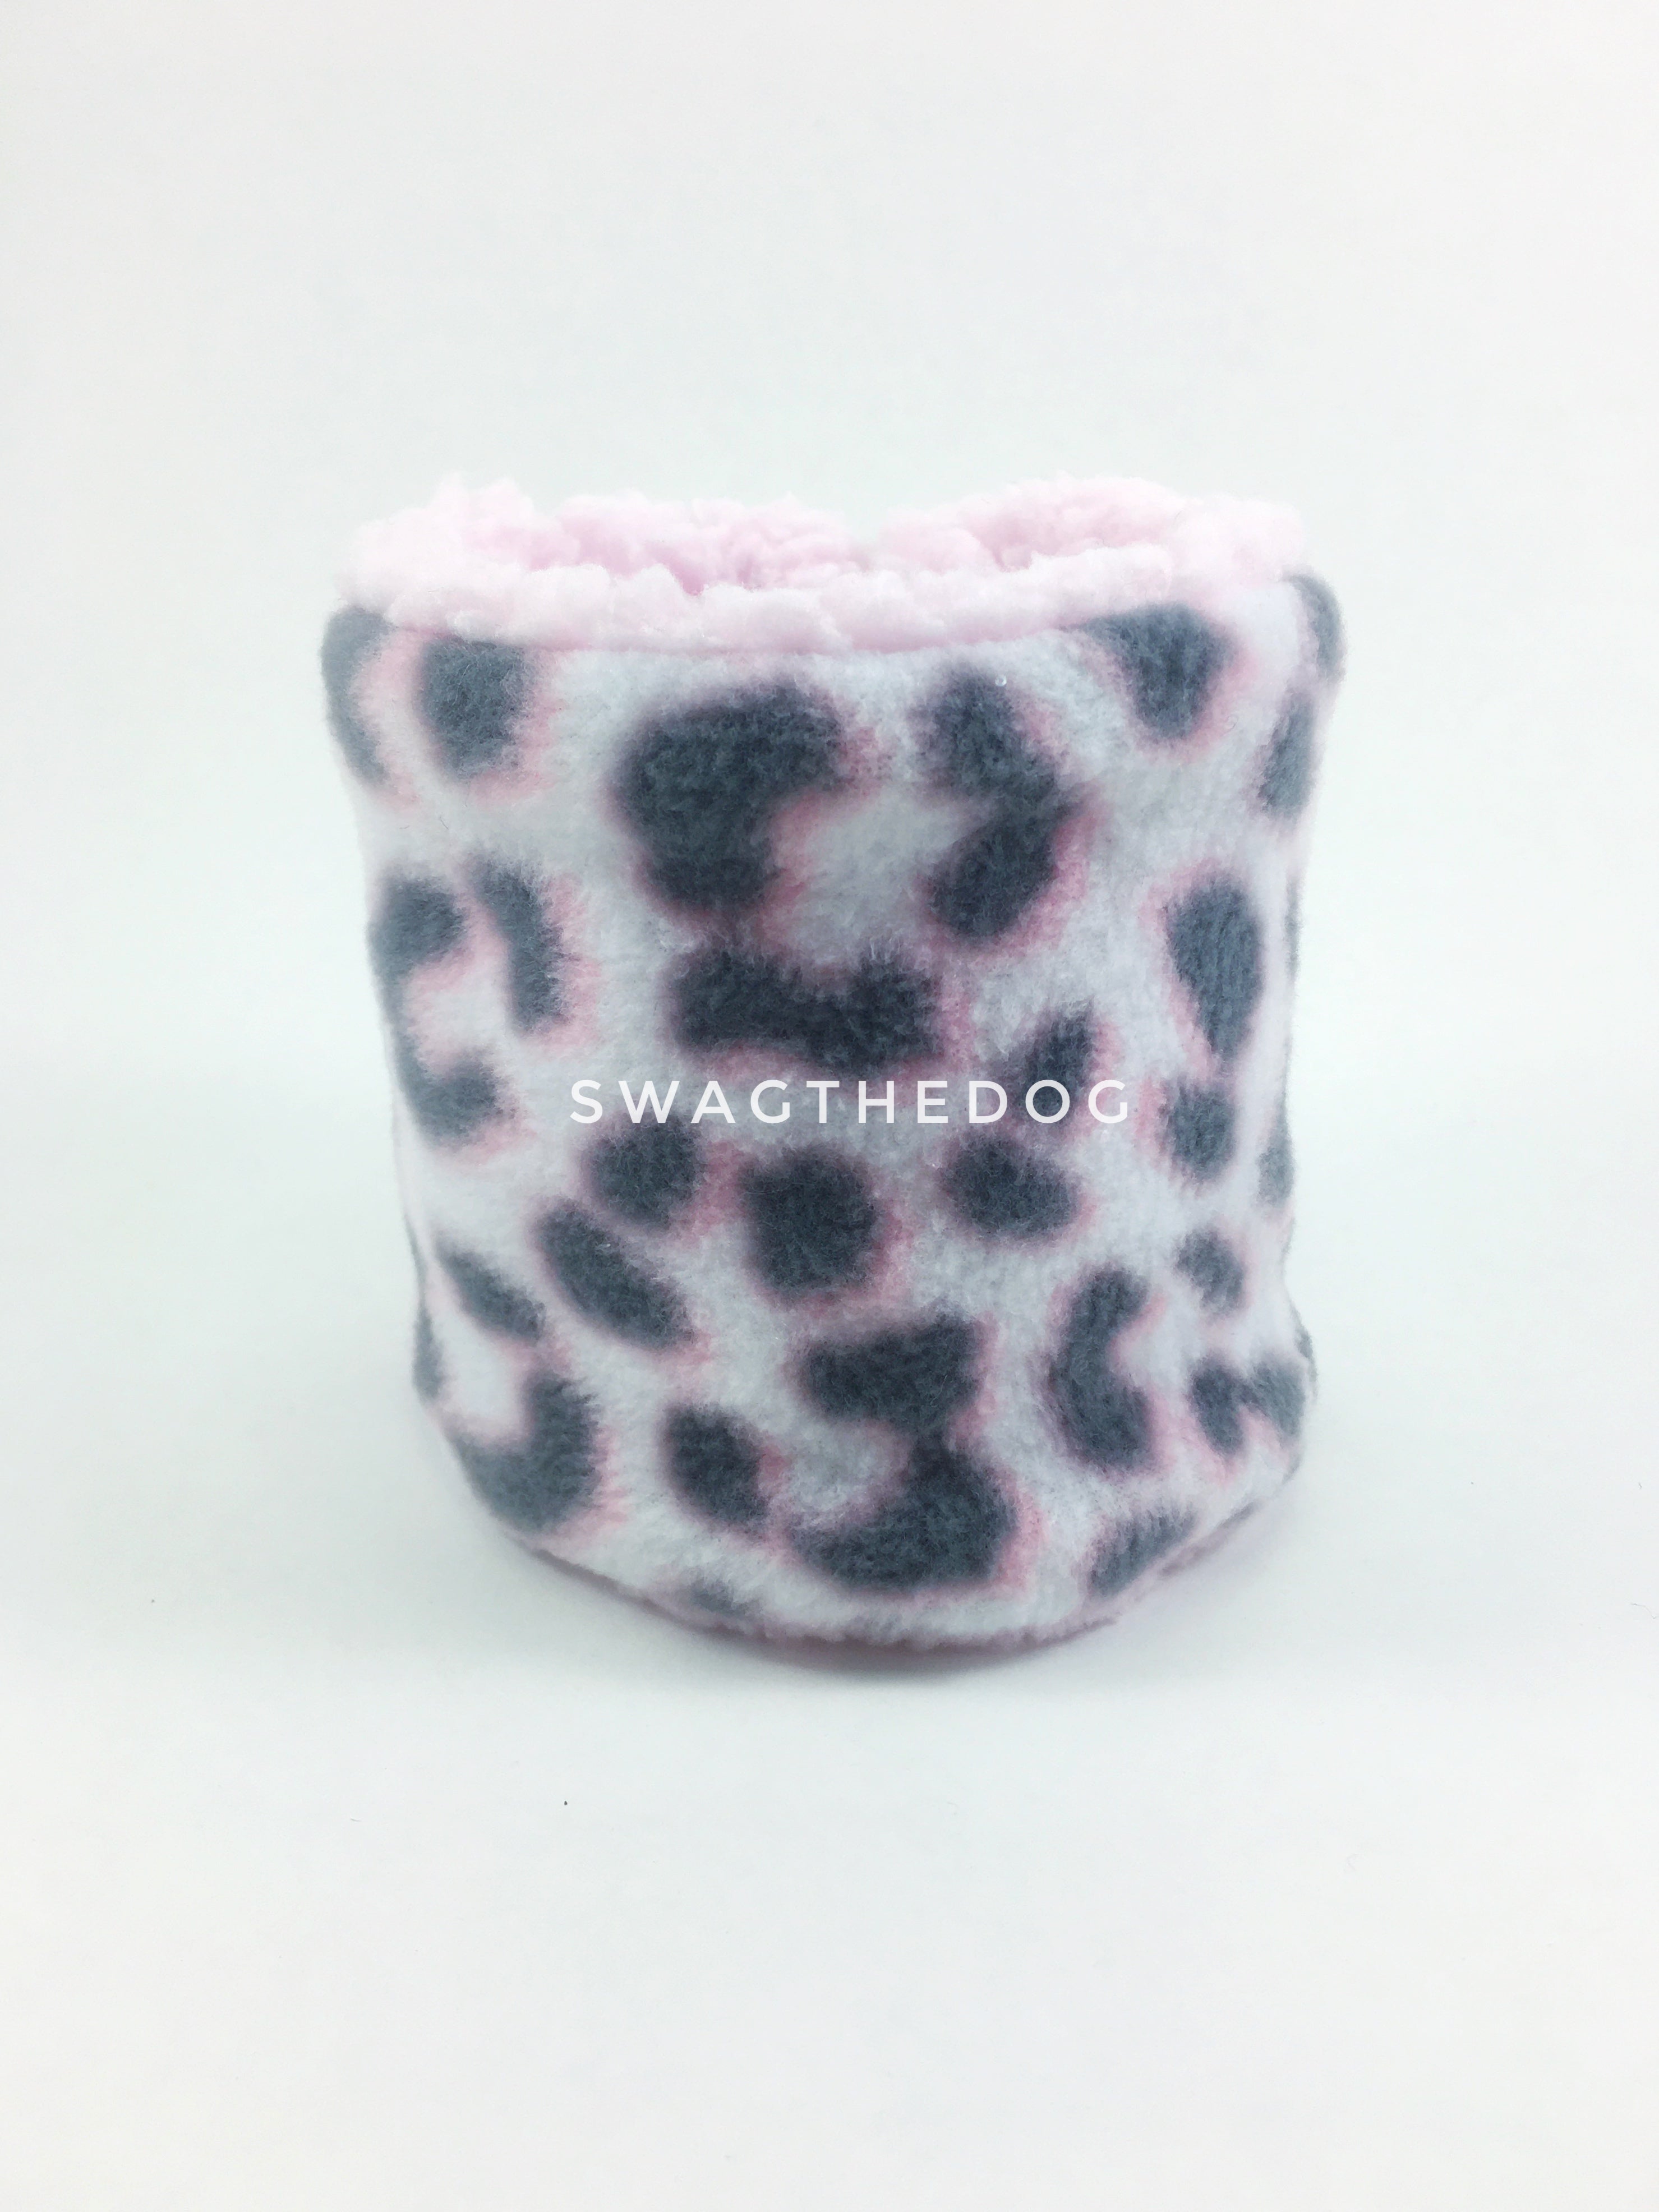 Pink Snow Leopard Swagsnood - Product Front View. Pink snow leopard print fleece Dog Snood and pink sherpa peeking out